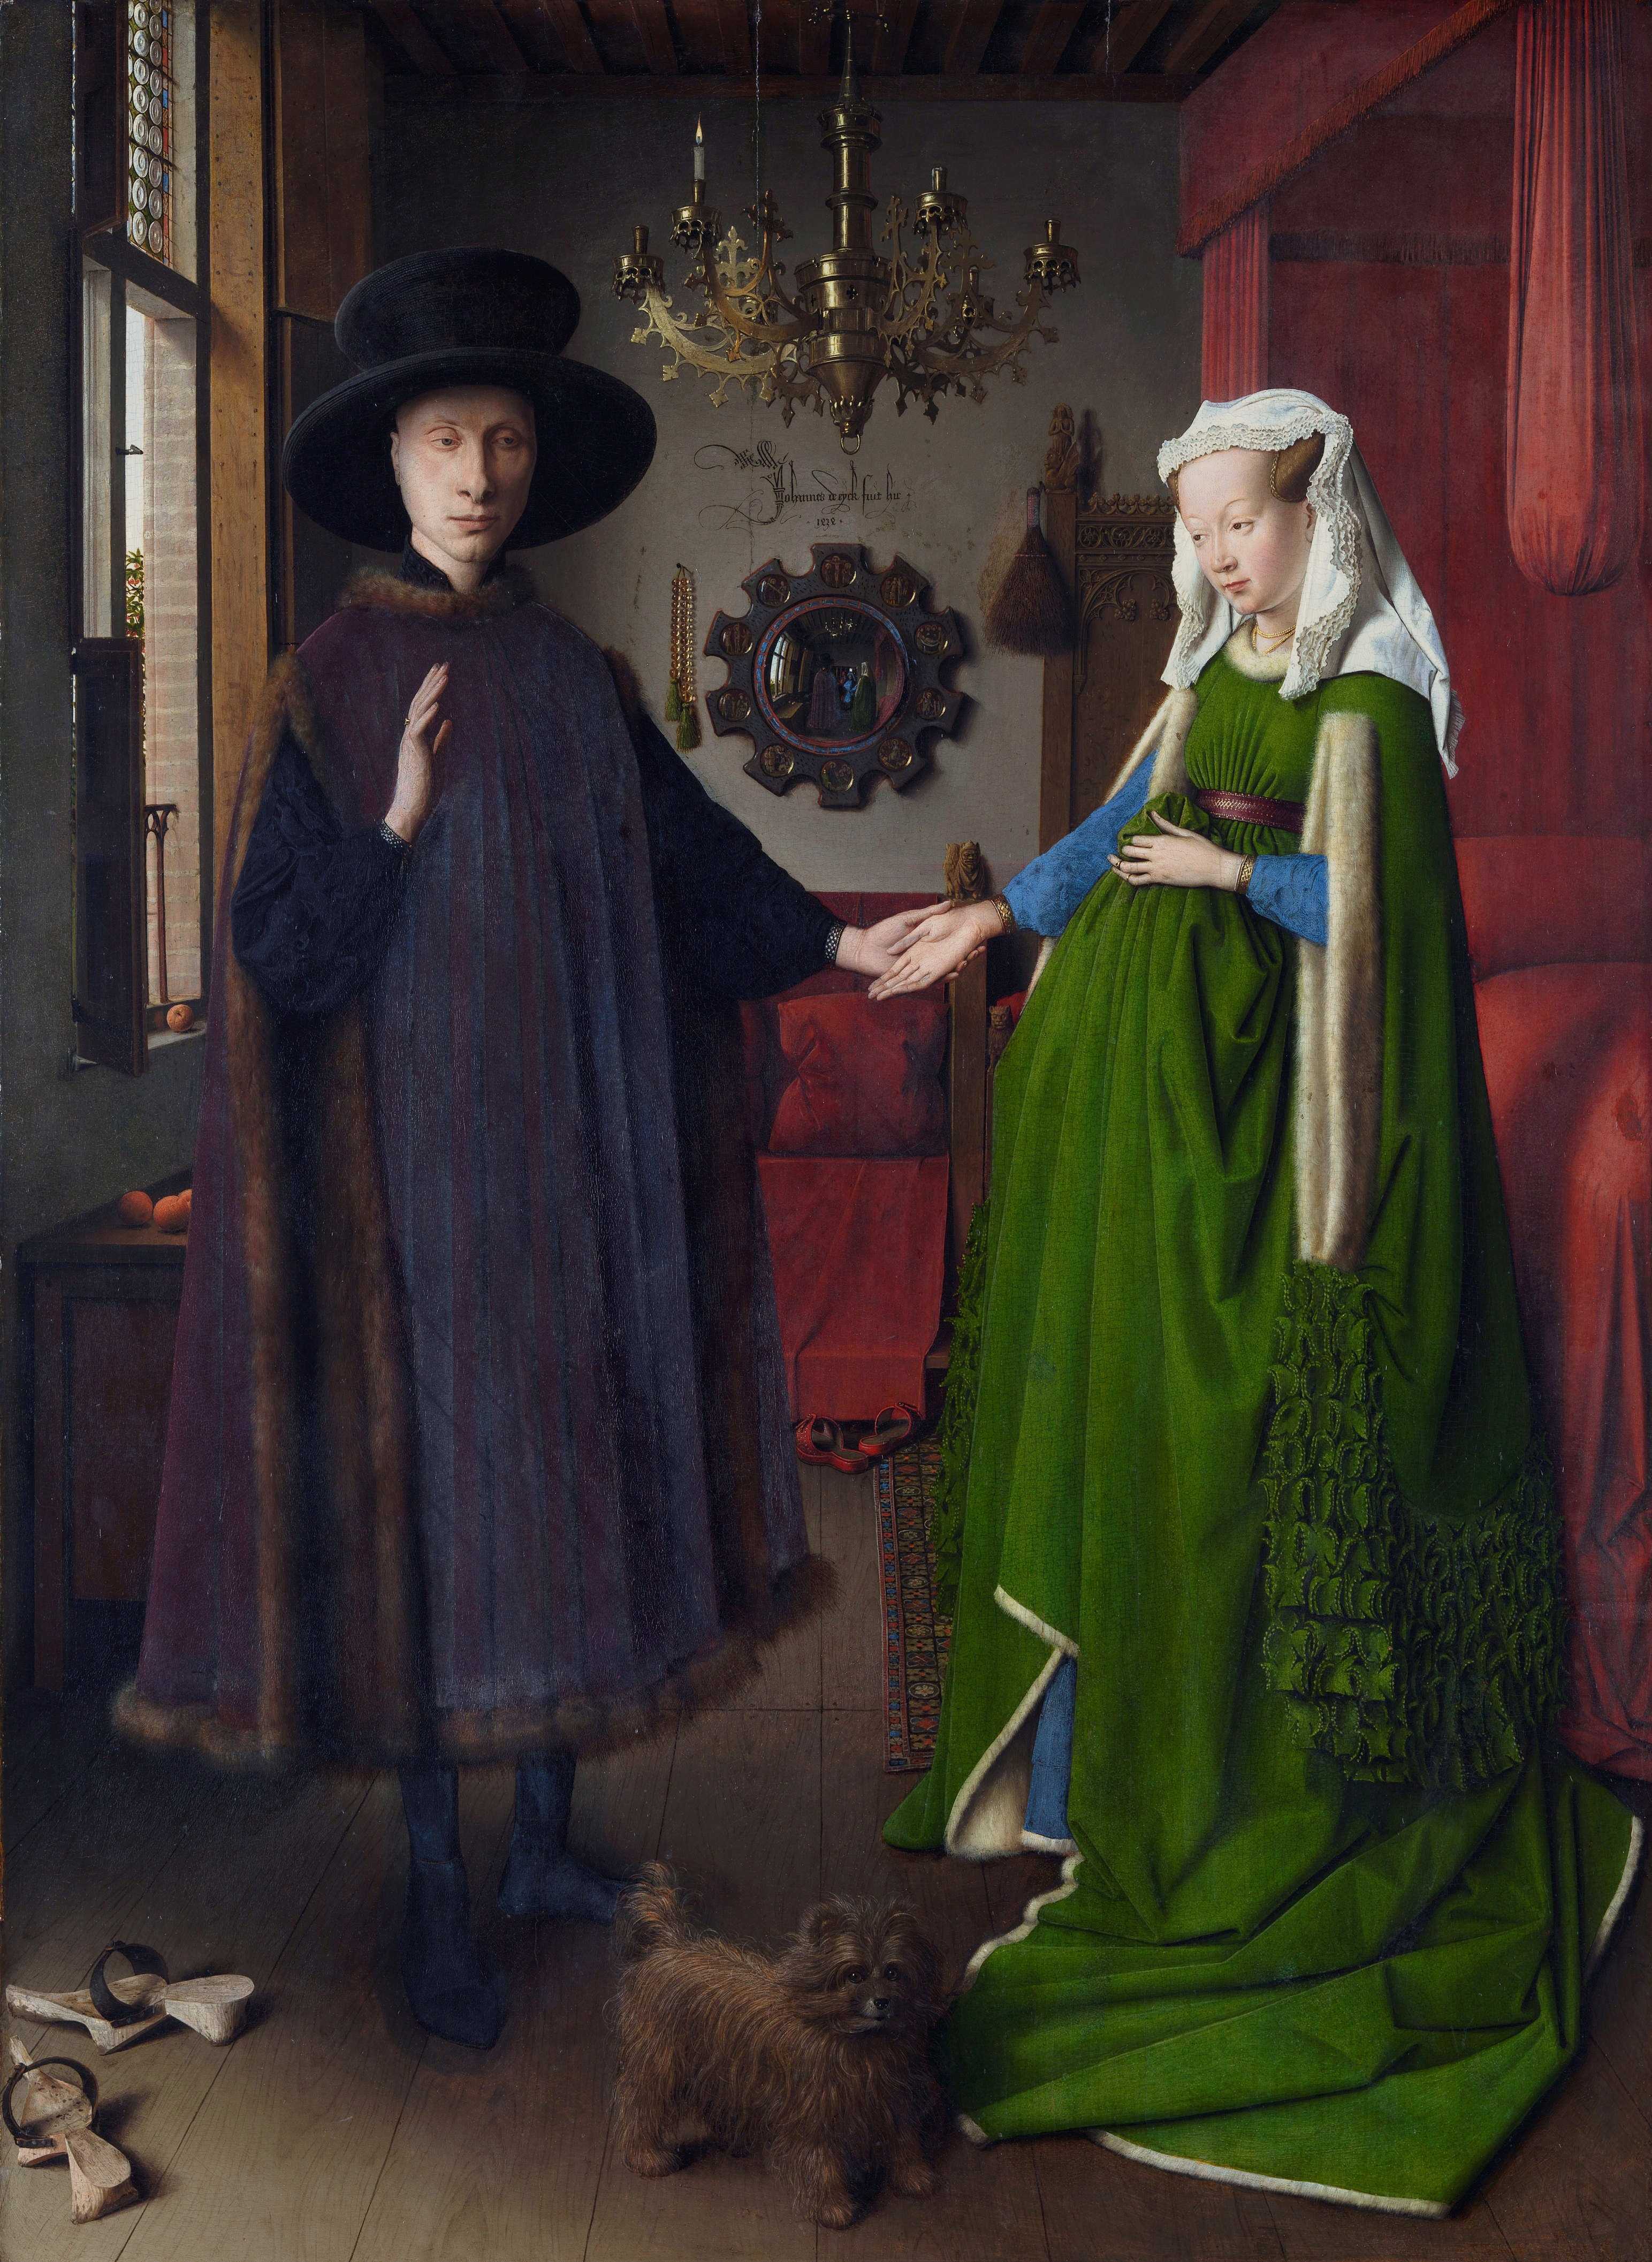 Find out more about Jan van Eyck - The Arnolfini Portrait